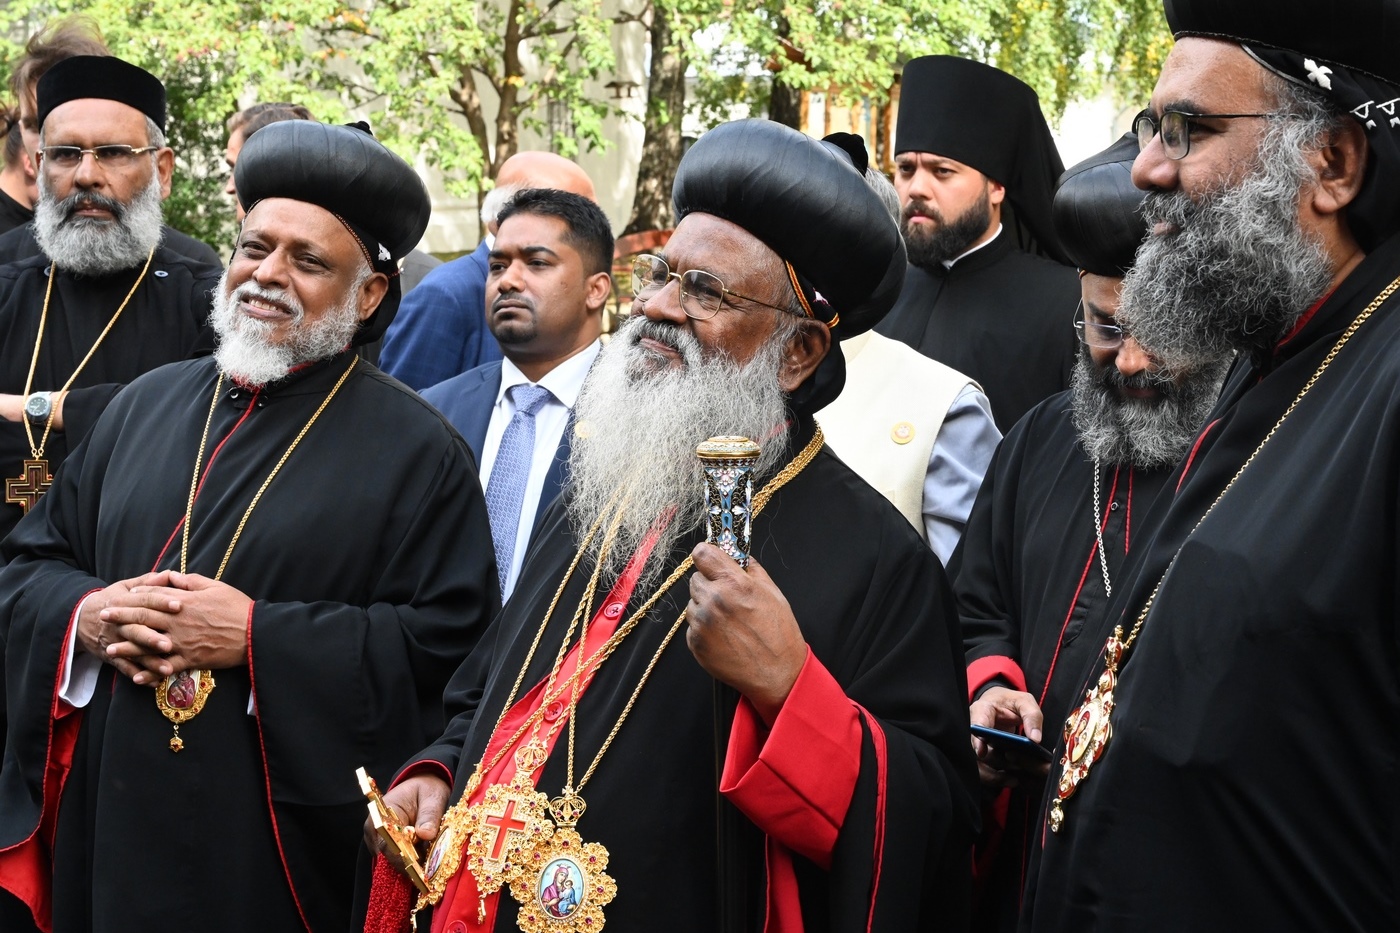 We Express Support for the Russian Orthodox Church in Everything : Primate of Malankara Orthodox Church